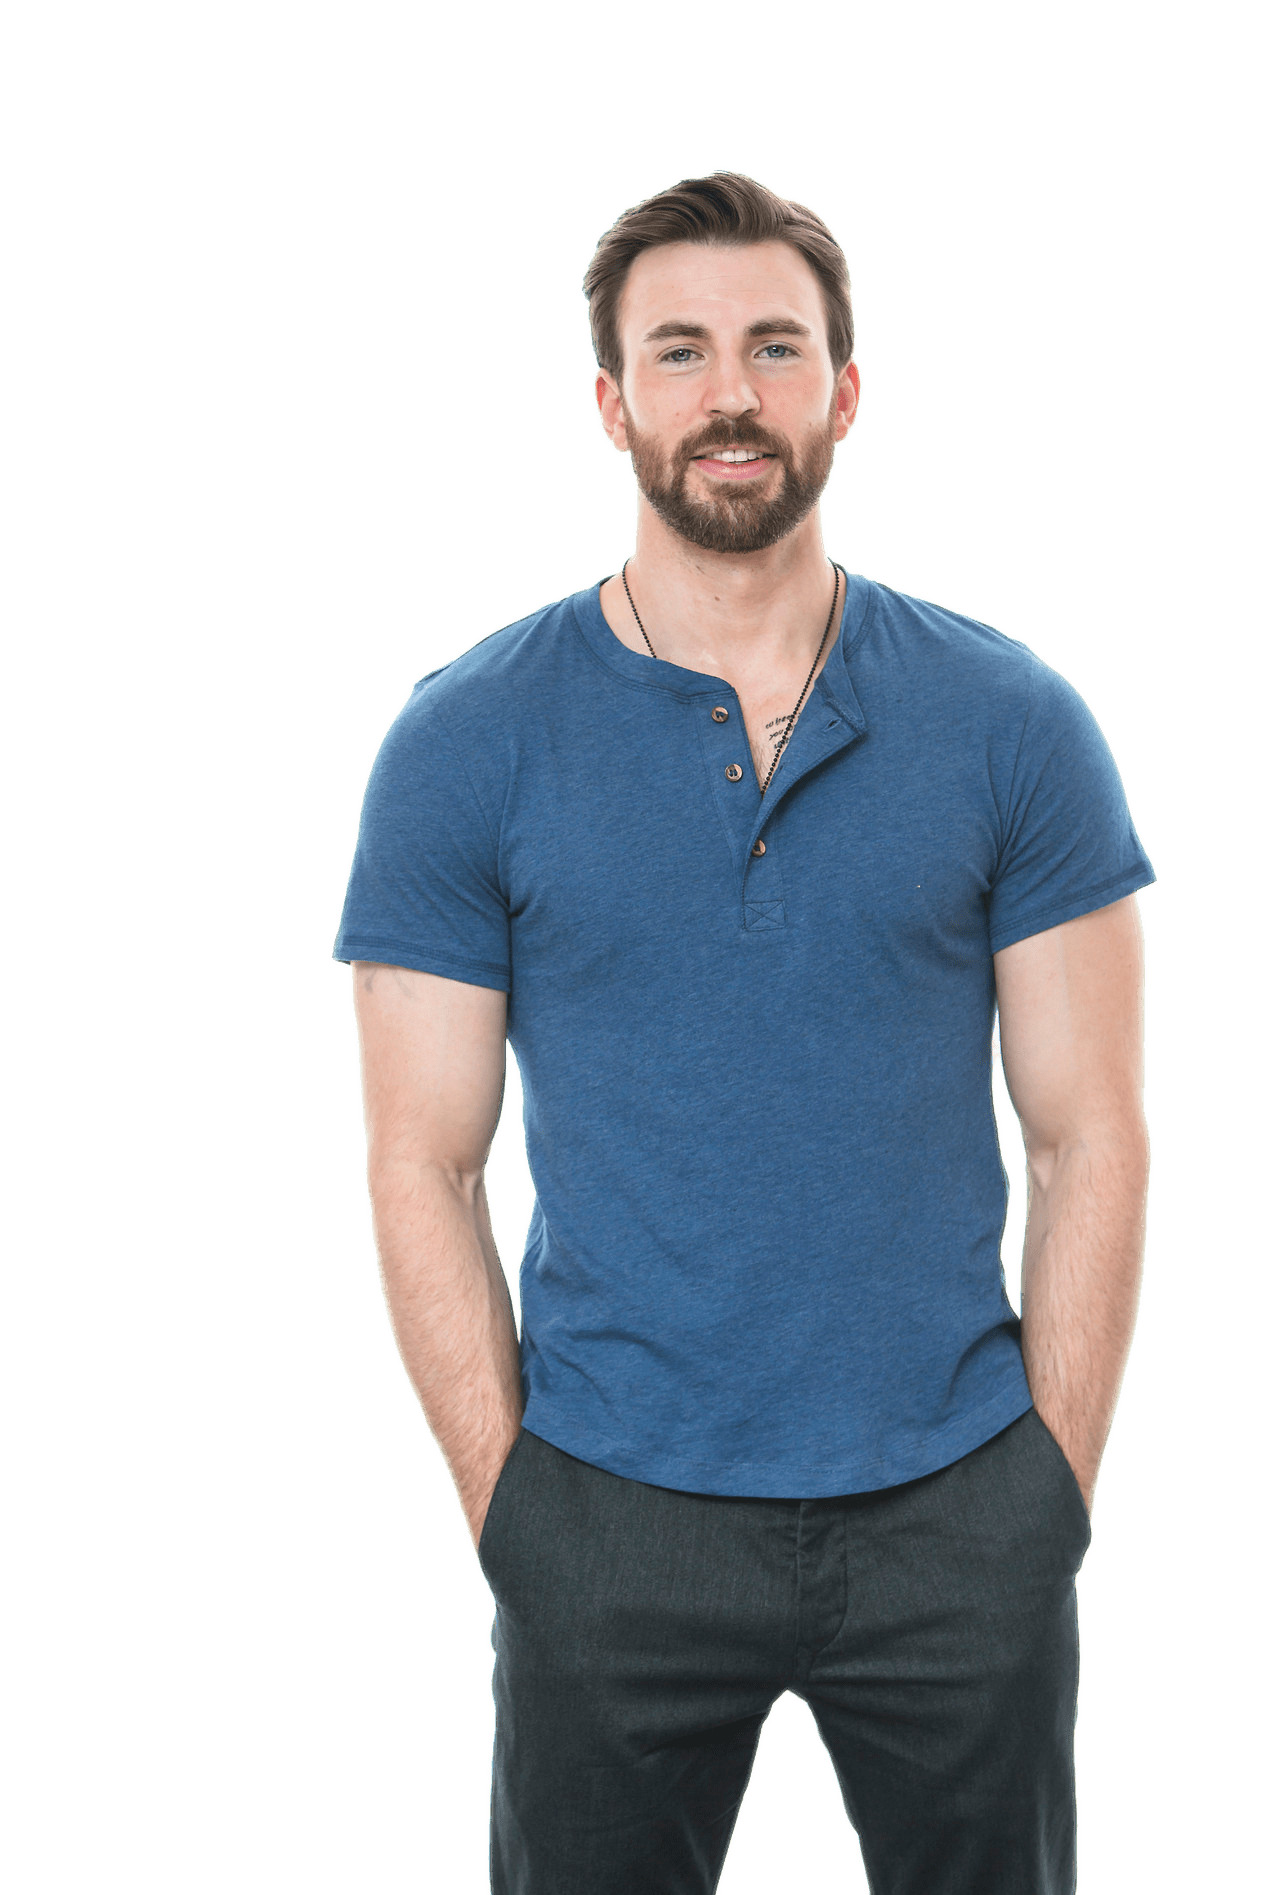 Chris Evans Standing png icons